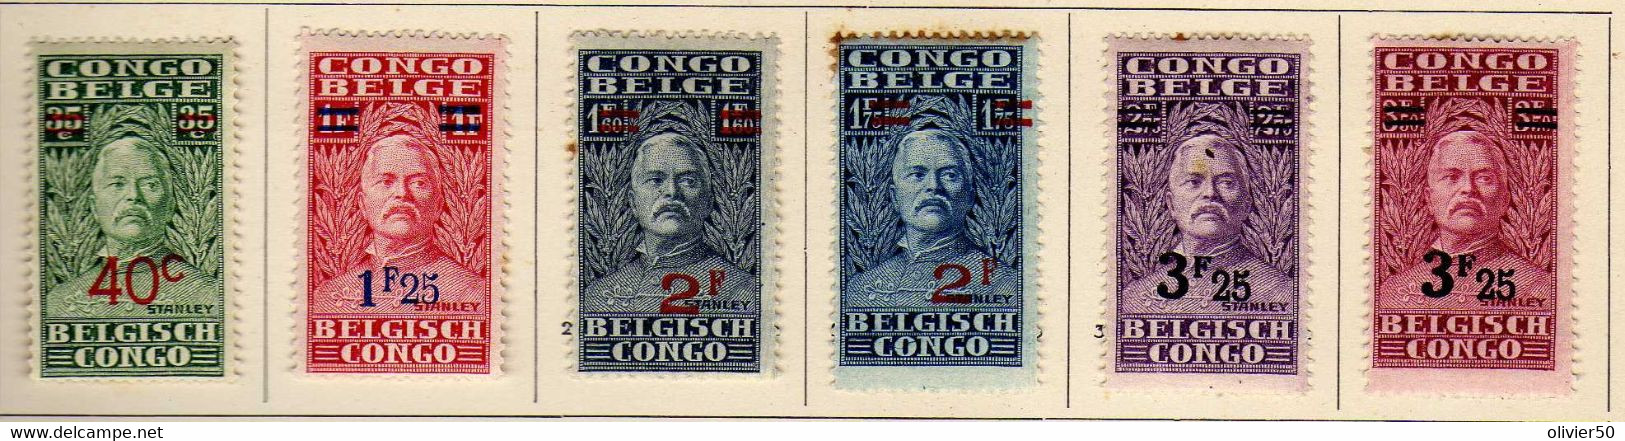 Congo Belge (1931) - Stanley Surcharges - Neufs* - MH - Unused Stamps